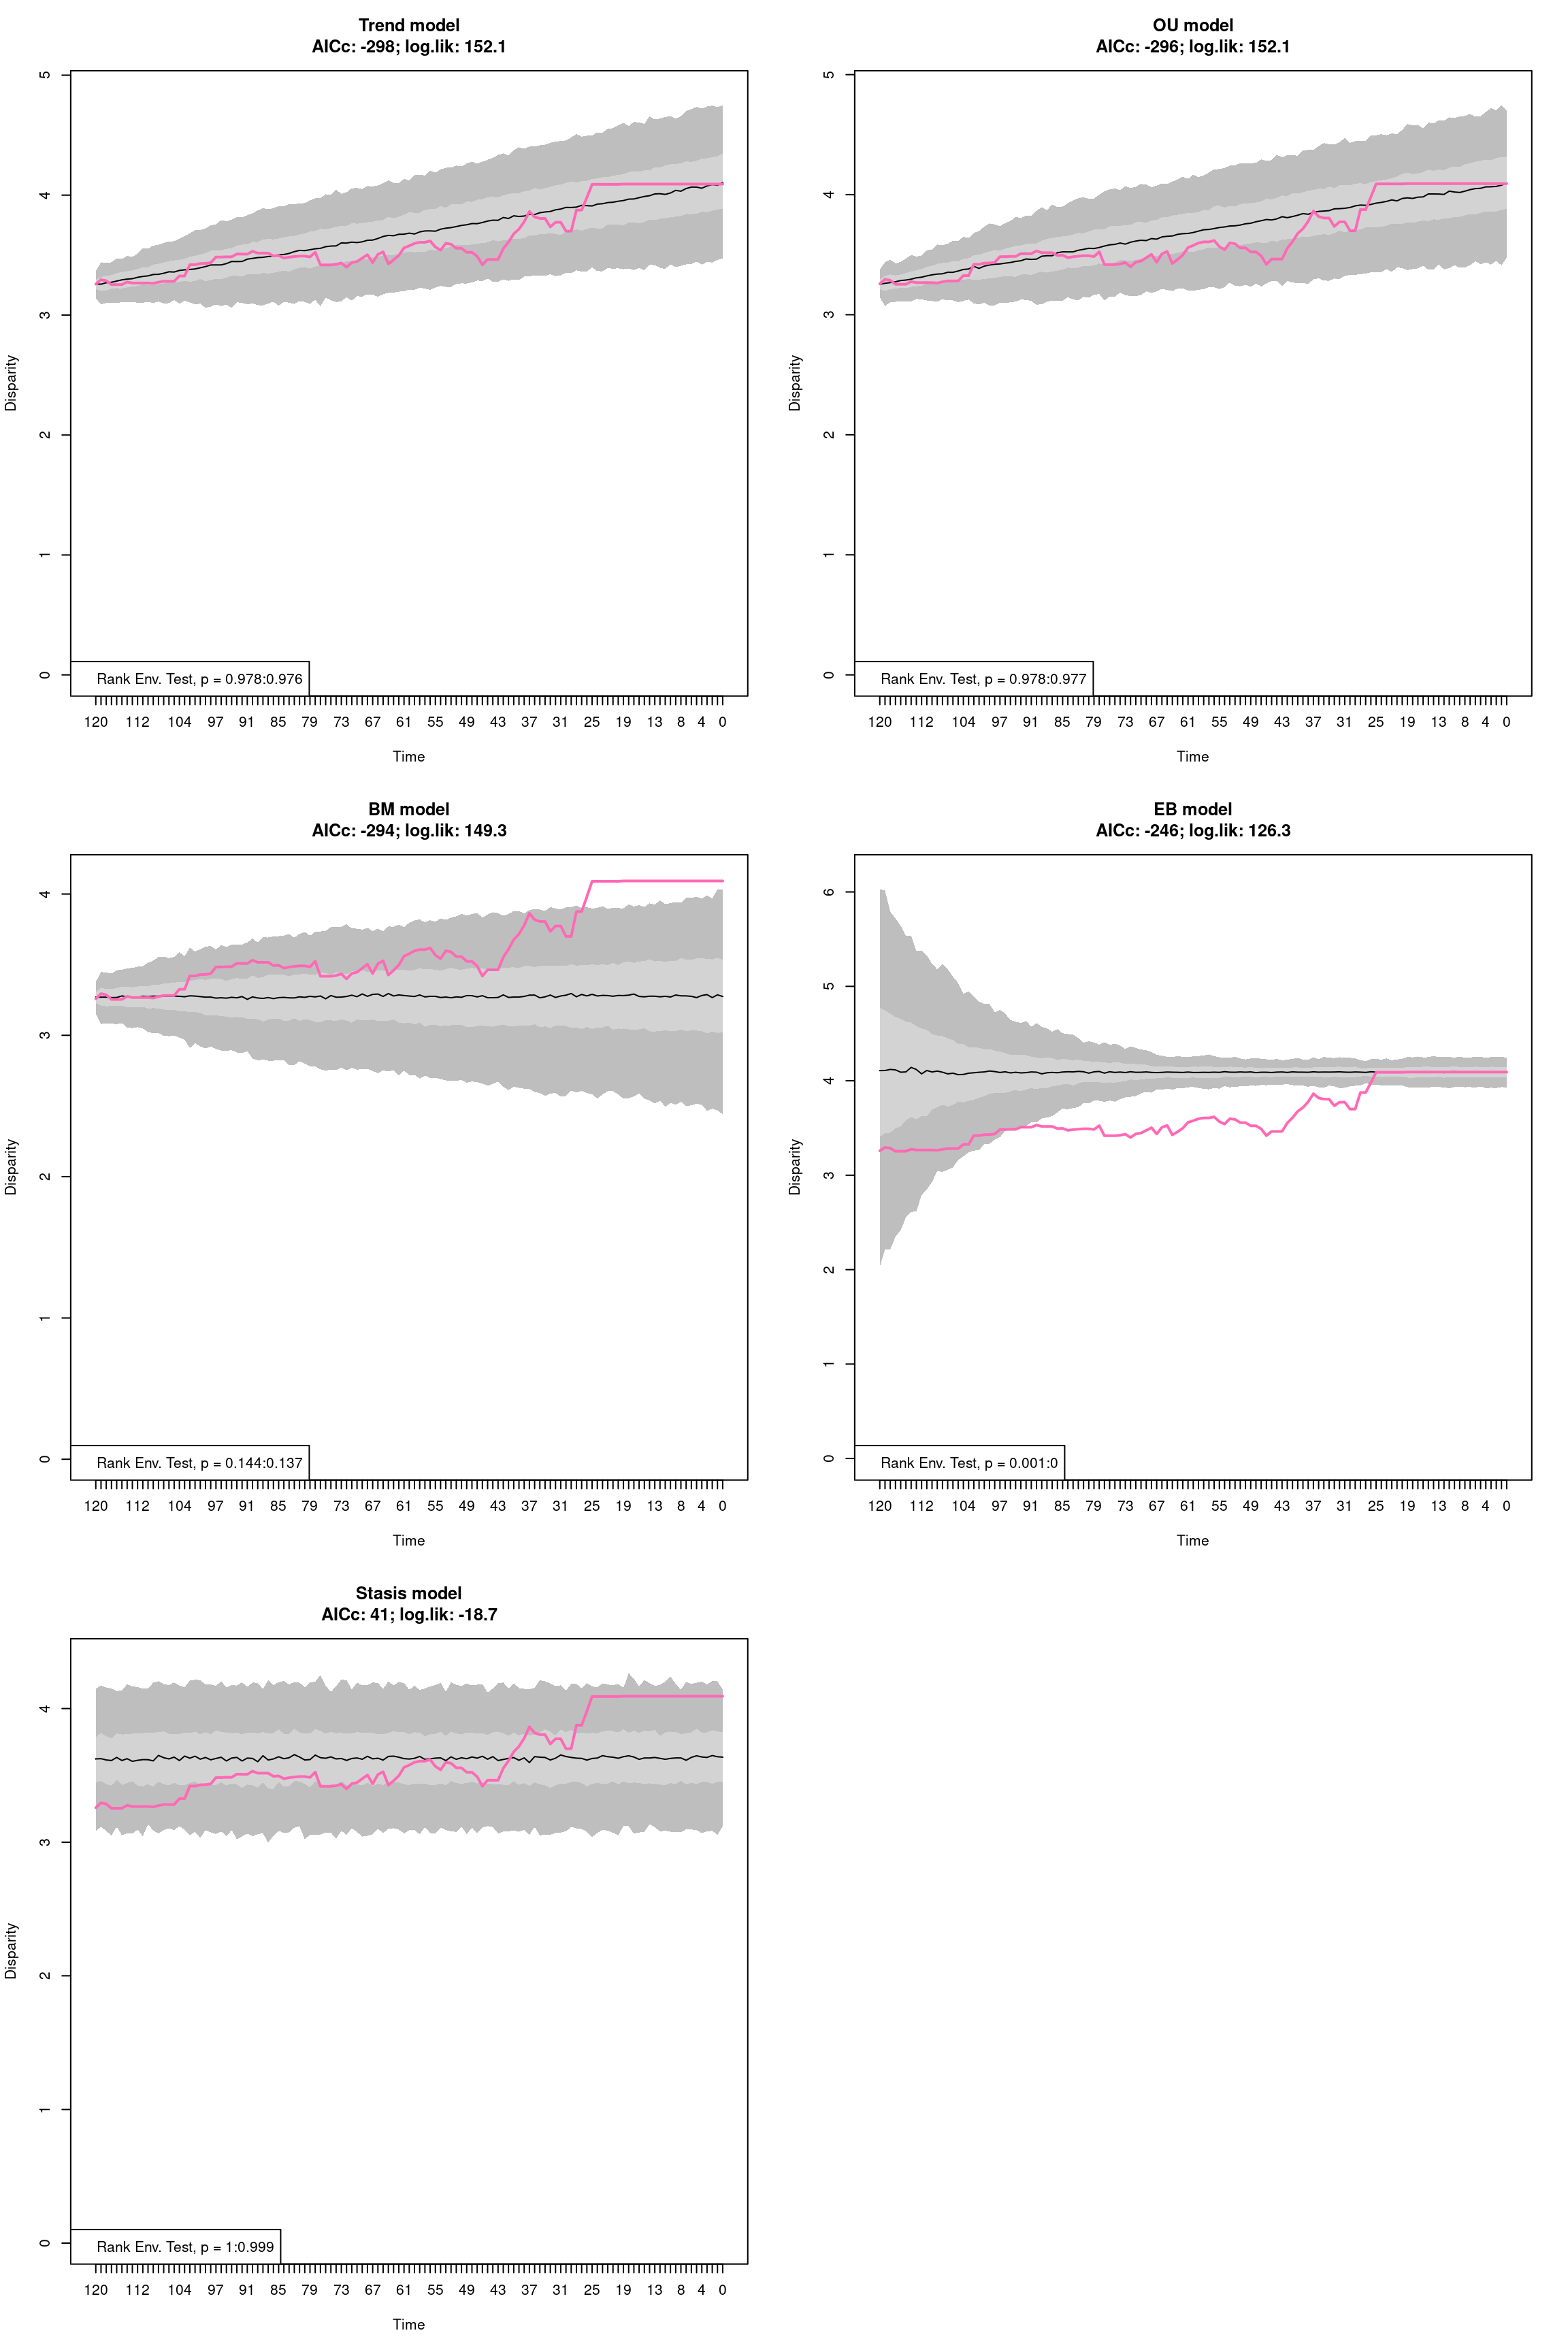 Empirical disparity through time (pink), simulate data based on estimated model parameters (grey), delta AICc, and range of p values from the Rank Envelope test for Trend, OU, BM, EB, and Stasis models